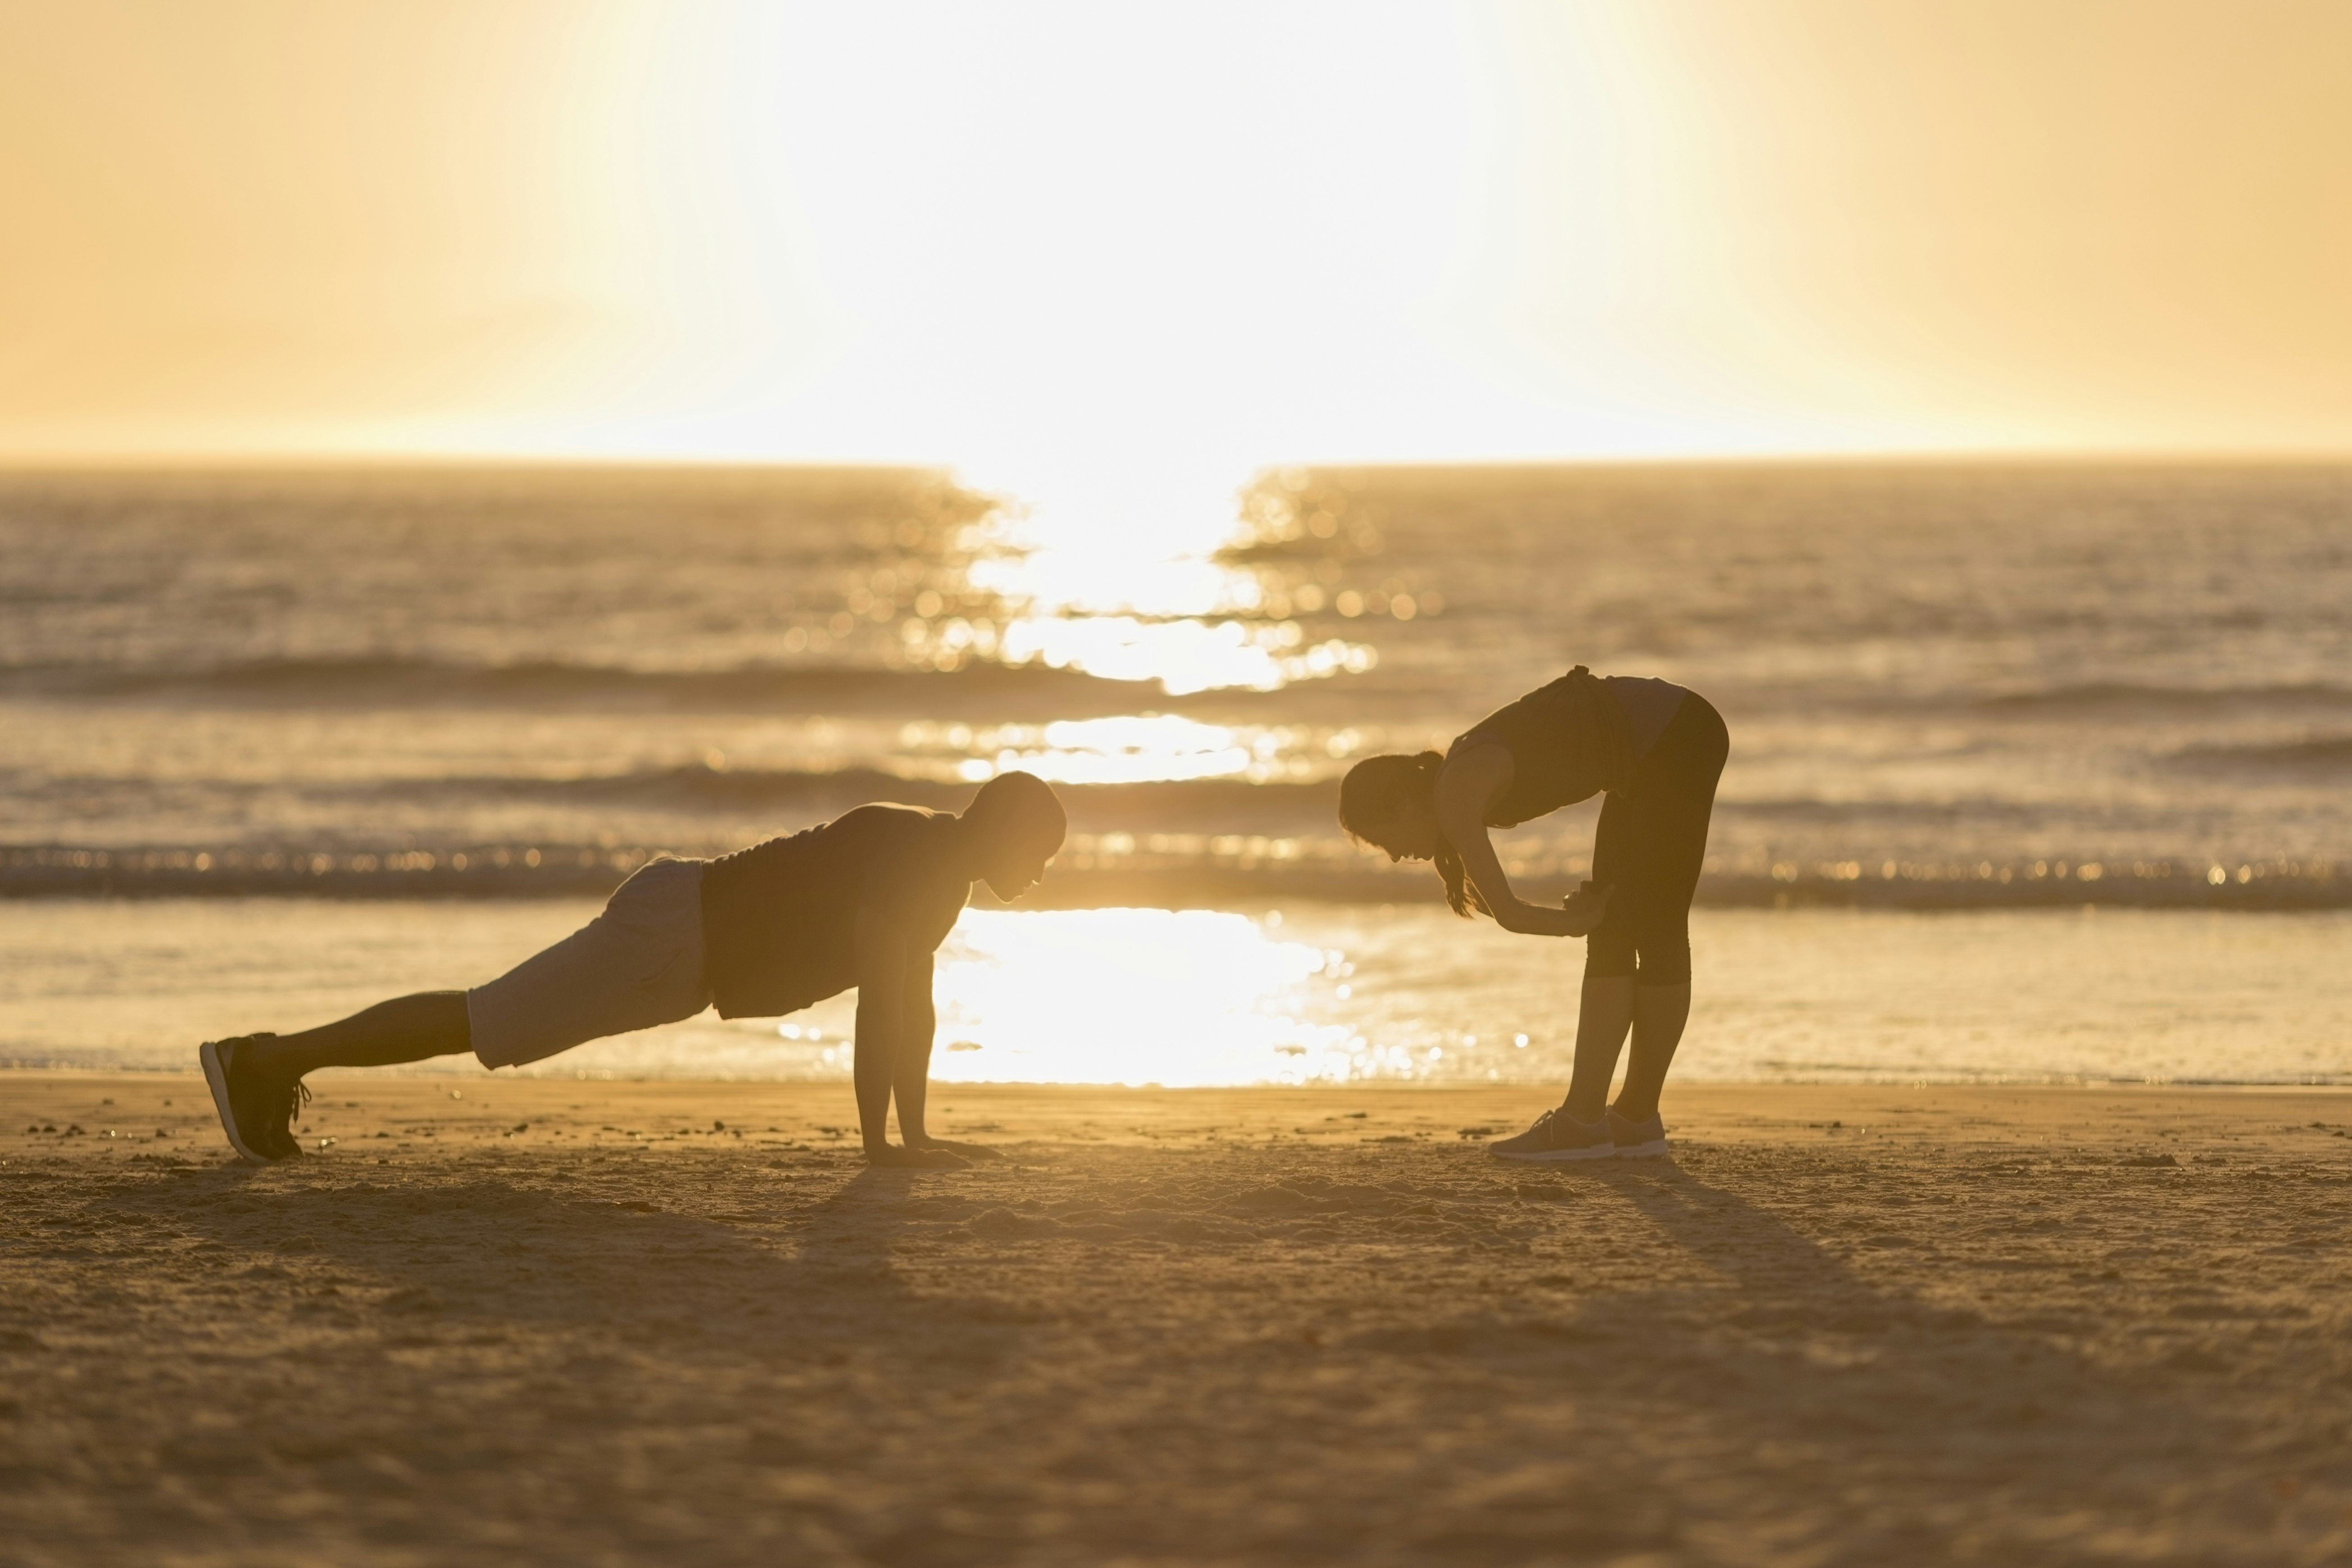 A man and woman exercise on a sandy beach at sunset. The male is mid-press up while the woman bends forward with her hands on her knees.